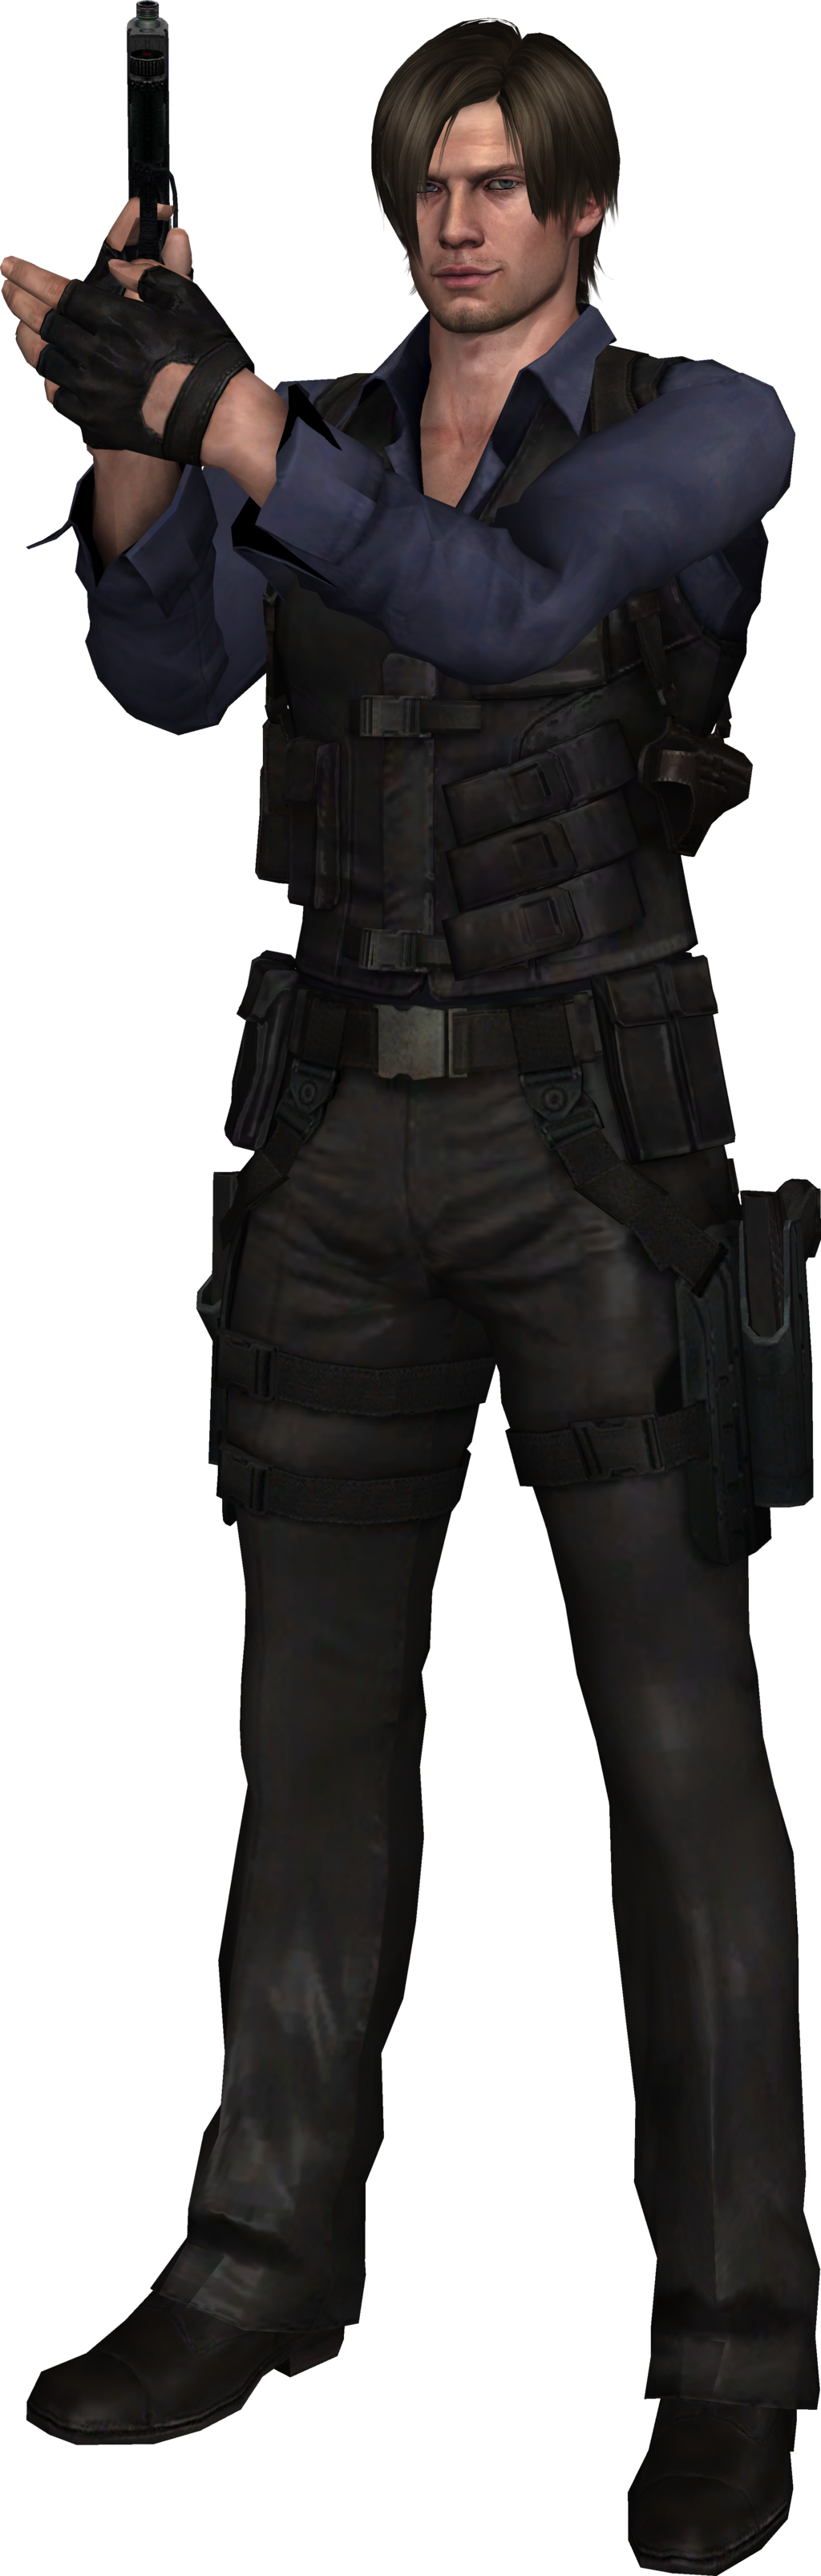 Leon S. Kennedy PNG Image with Transparent Background